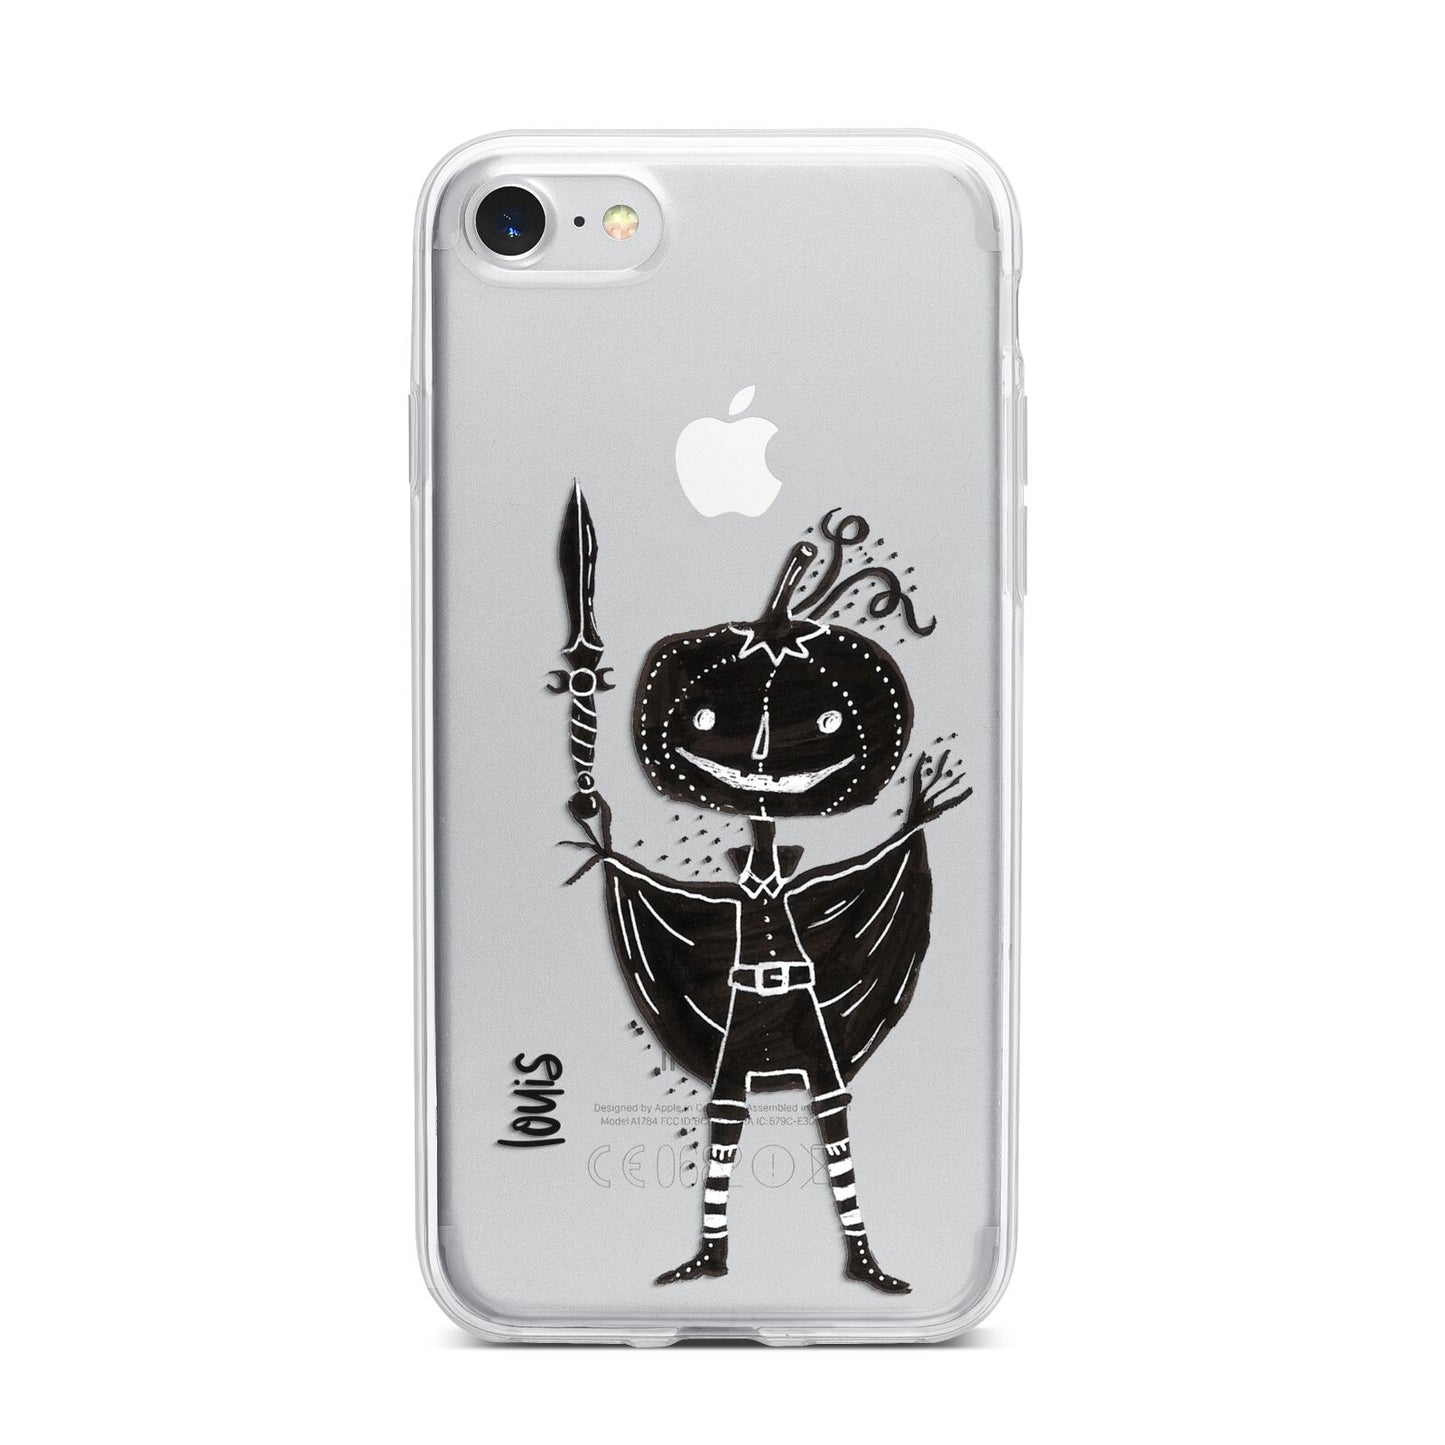 Pumpkin Head Personalised iPhone 7 Bumper Case on Silver iPhone